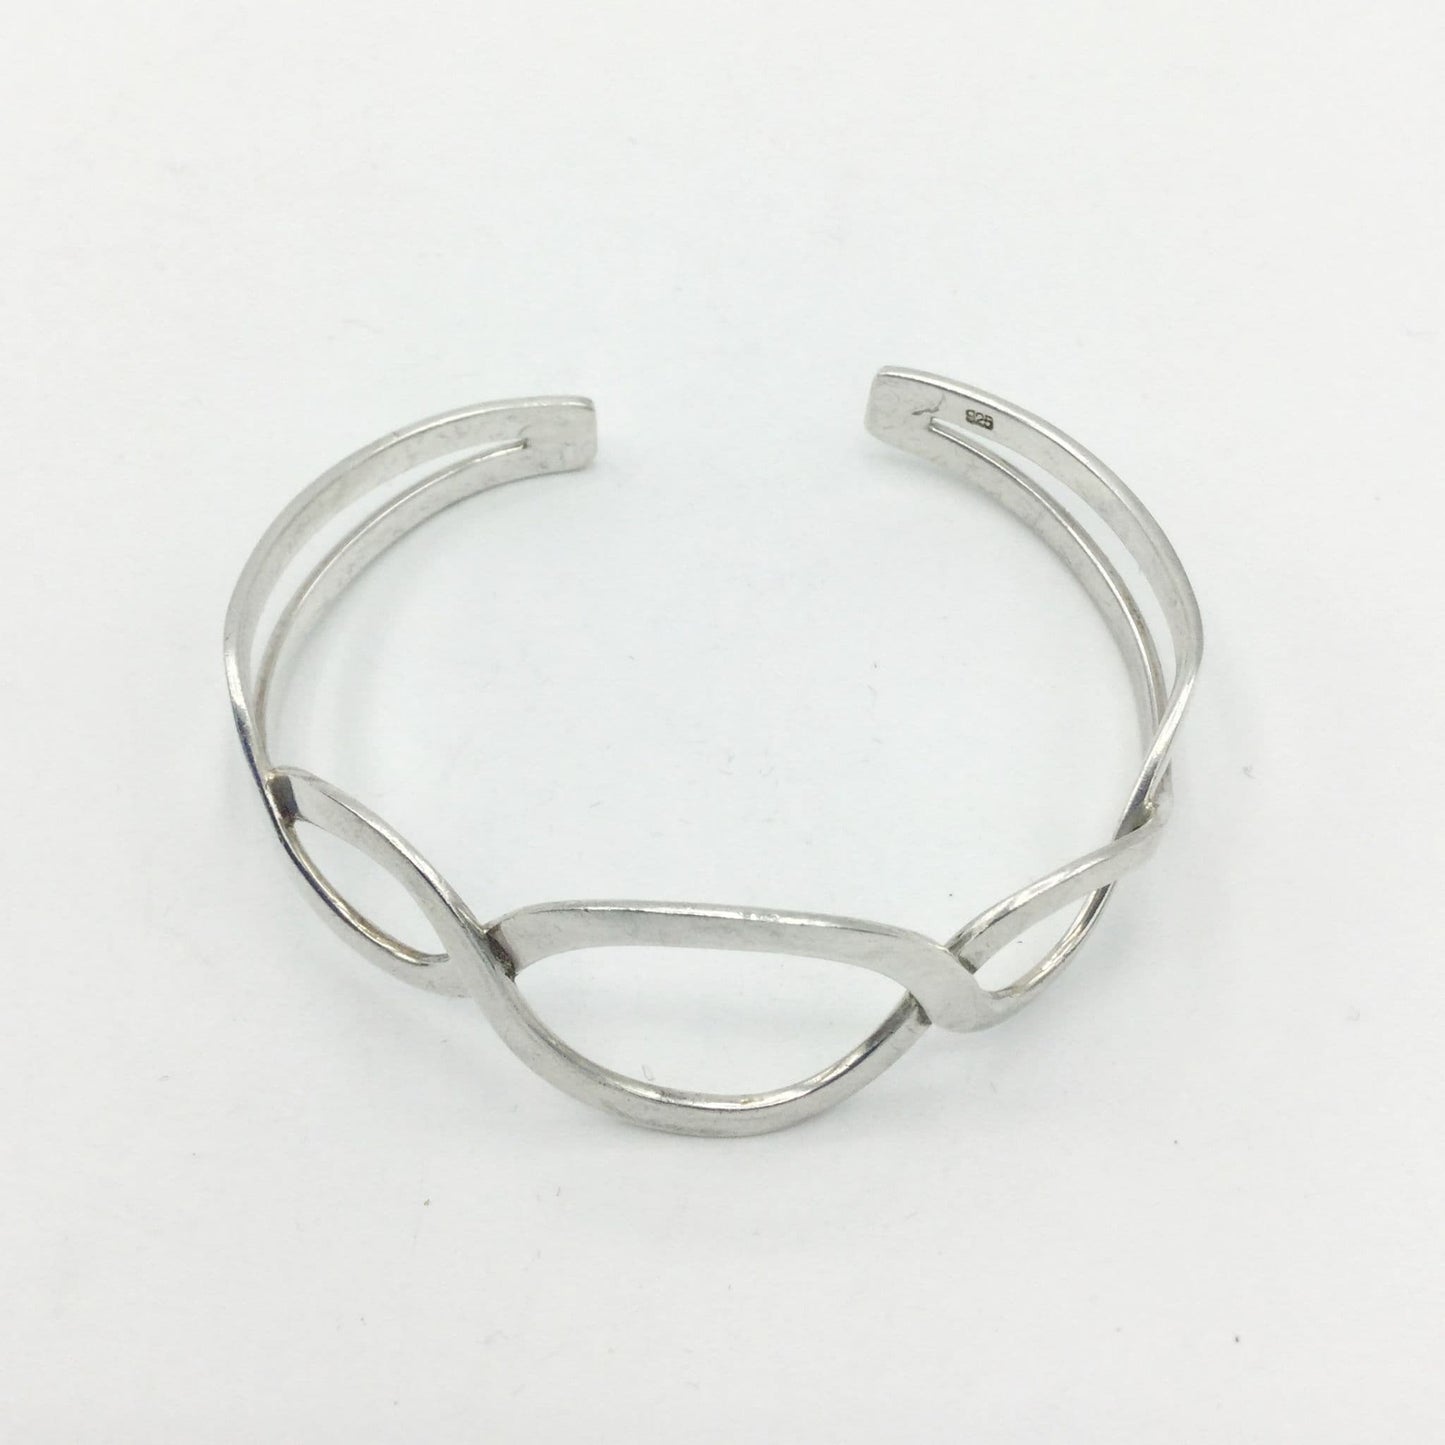 Boxed Sterling Silver Cuff Bangle Bracelet